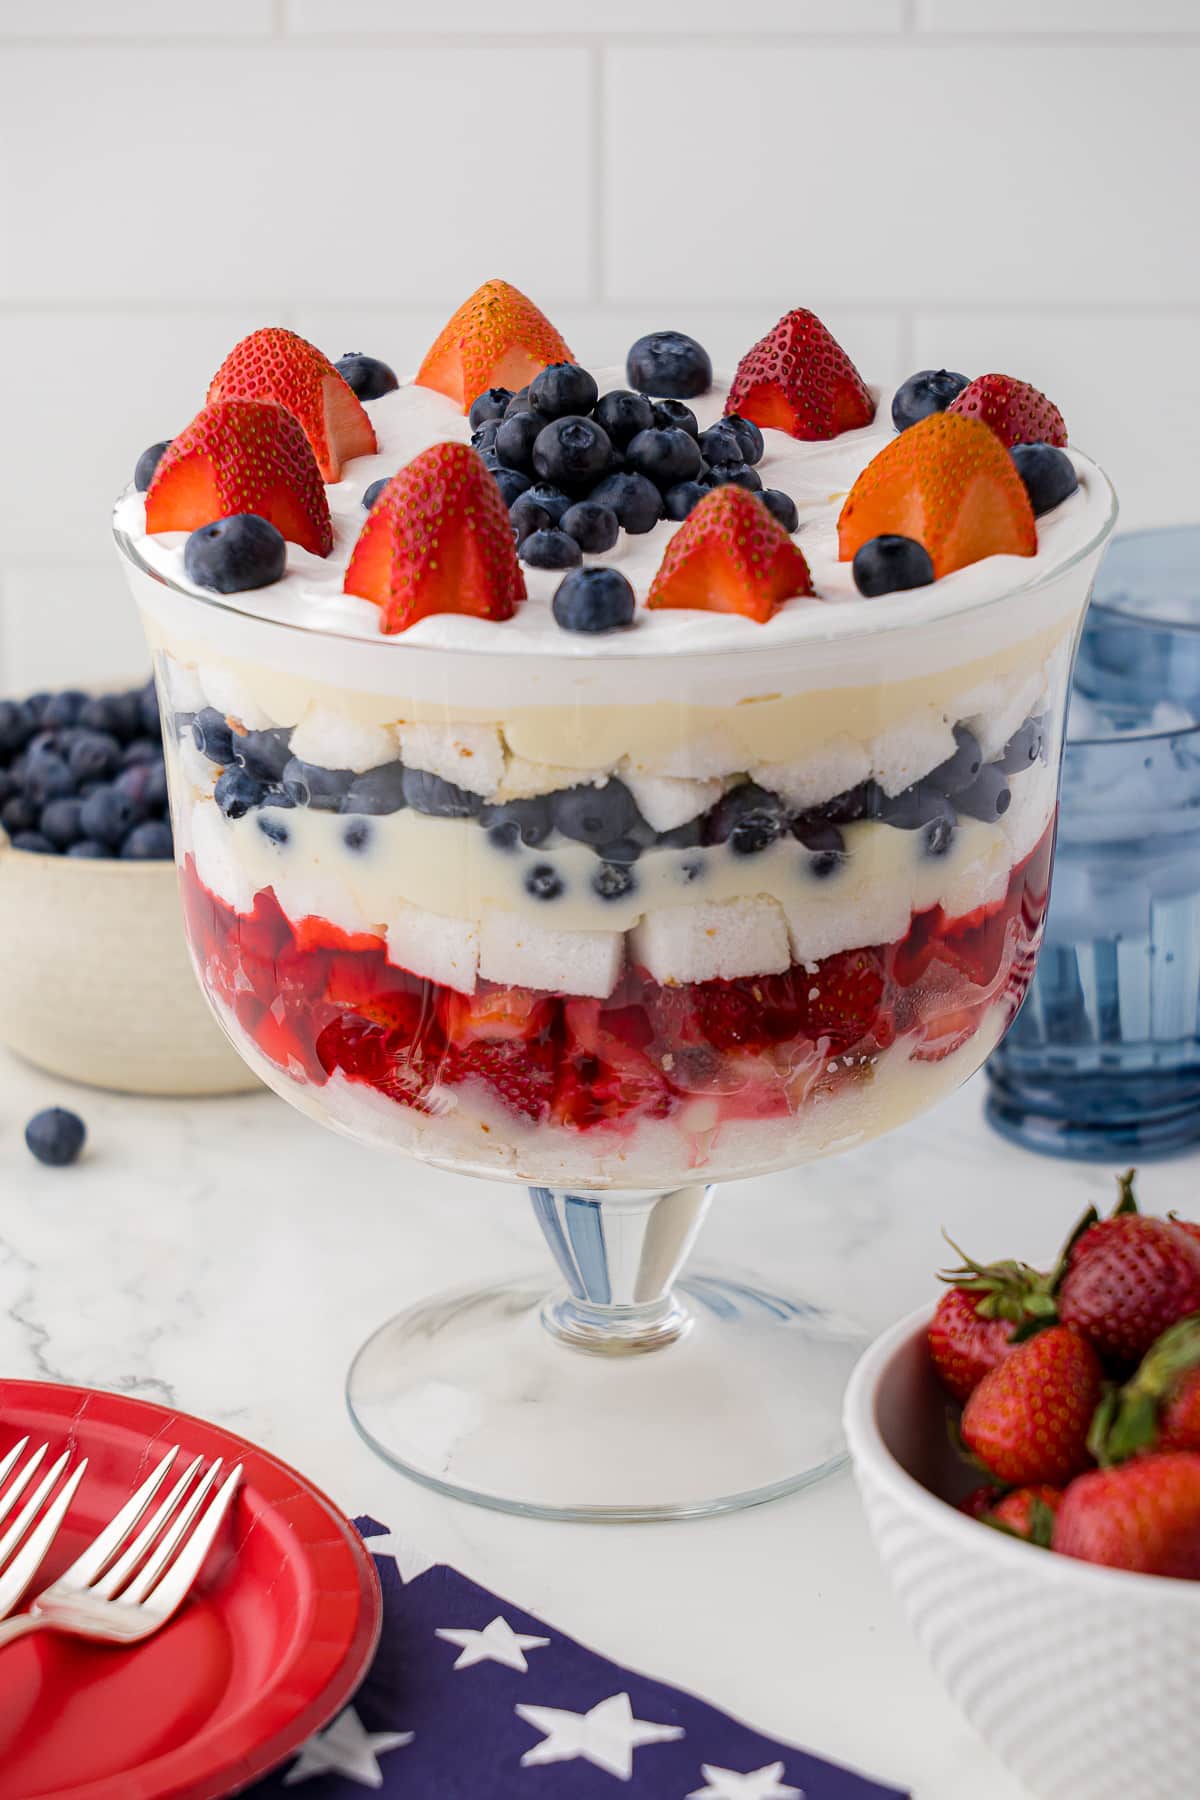 Strawberry, blueberry and cool whip layered trifle in glass bowl with patriotic napkins and plates